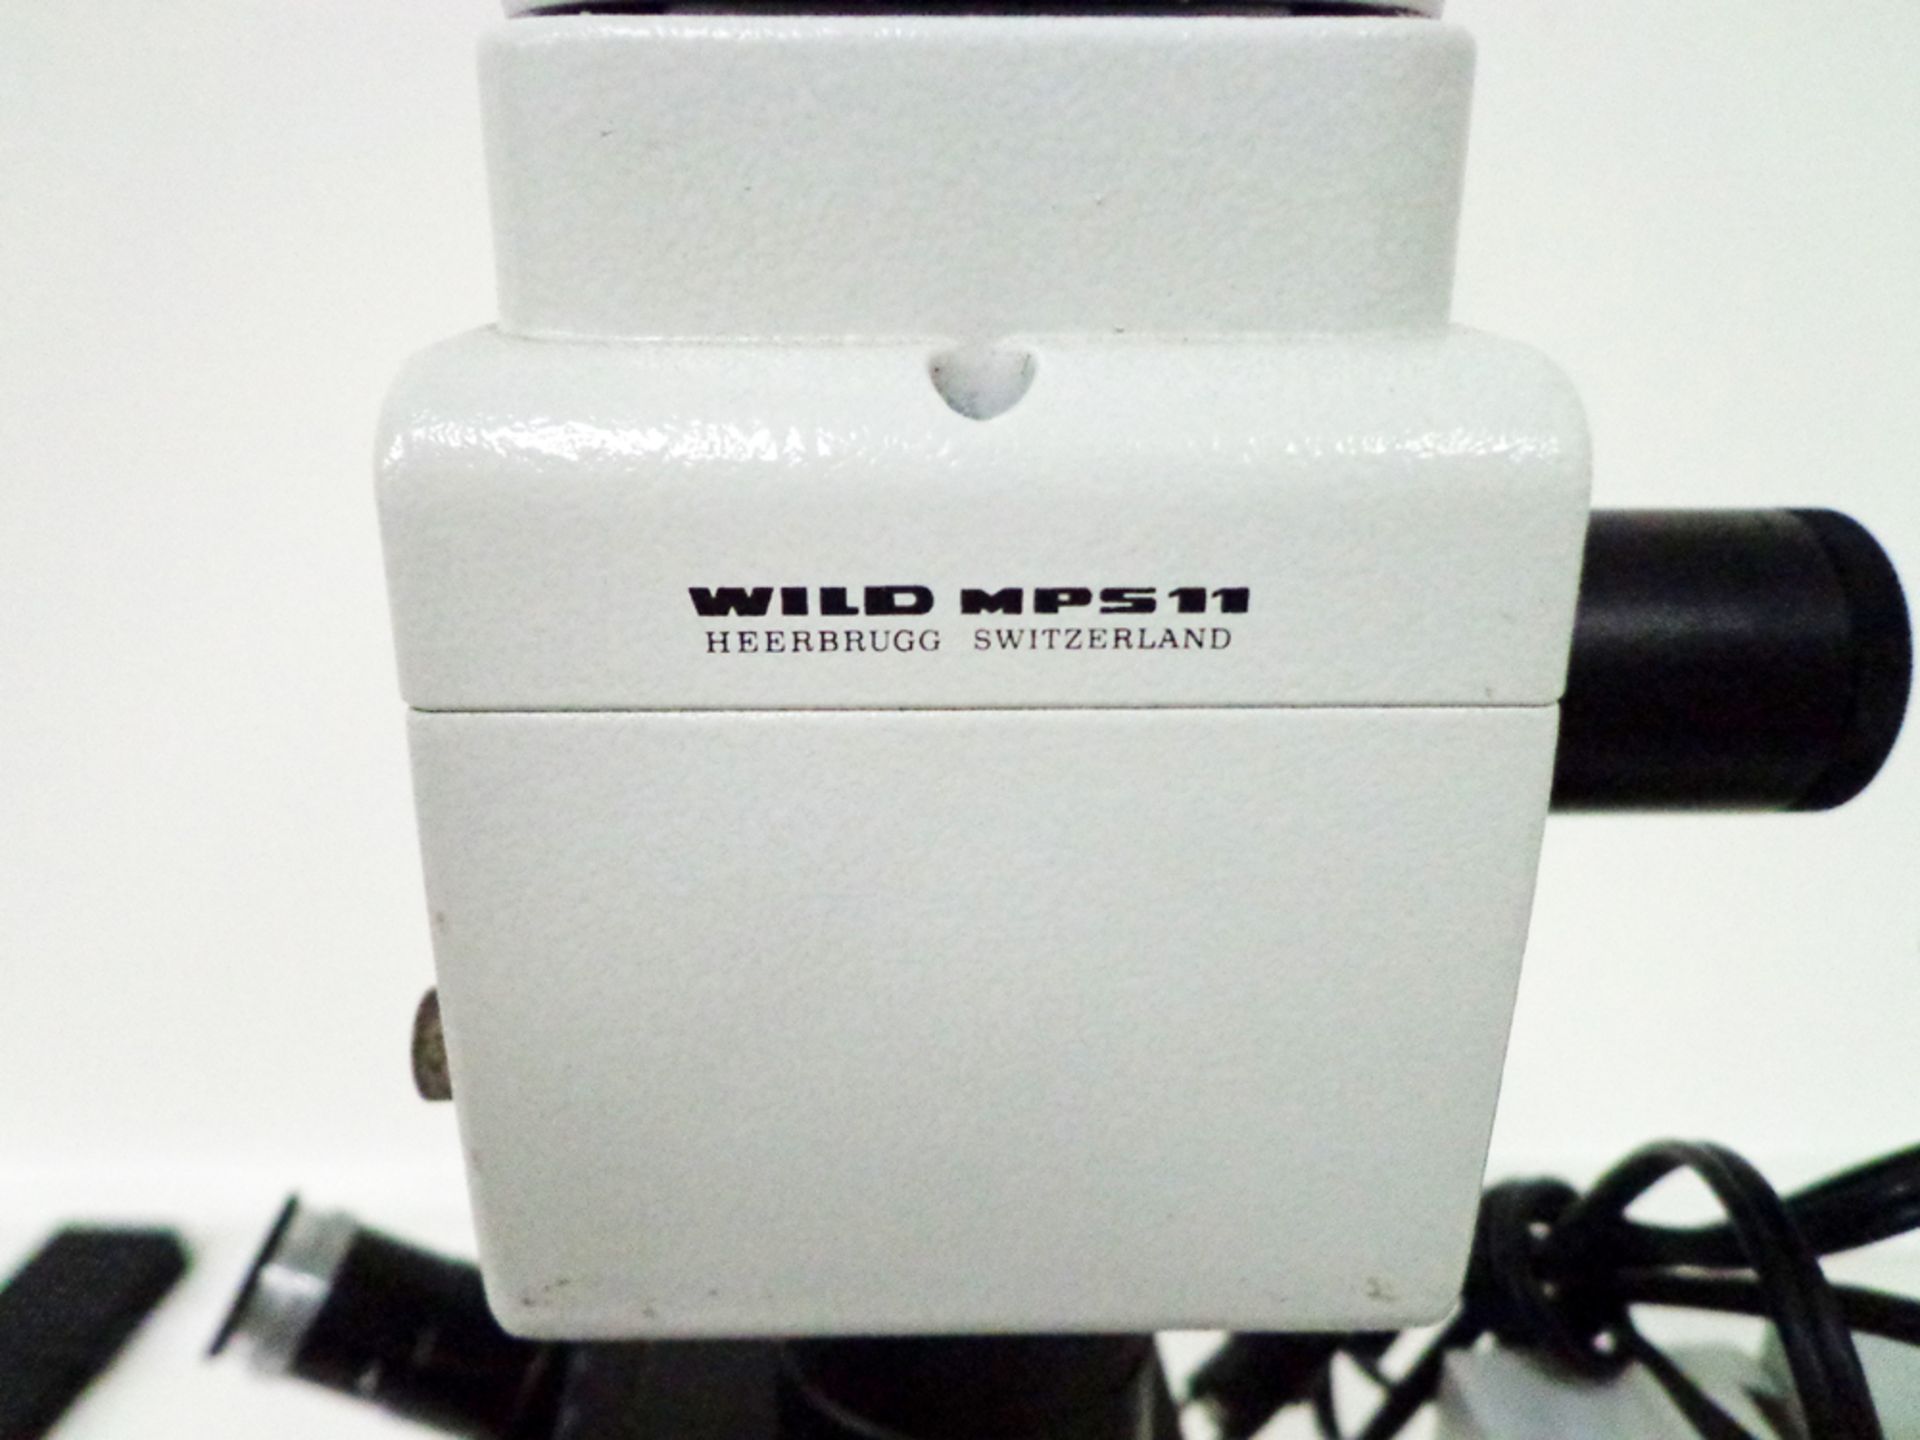 Leitz Diavert Phase Contrast Inverted Binocular Microscope with Wild (polaroid) MP511 Camera with - Image 16 of 17